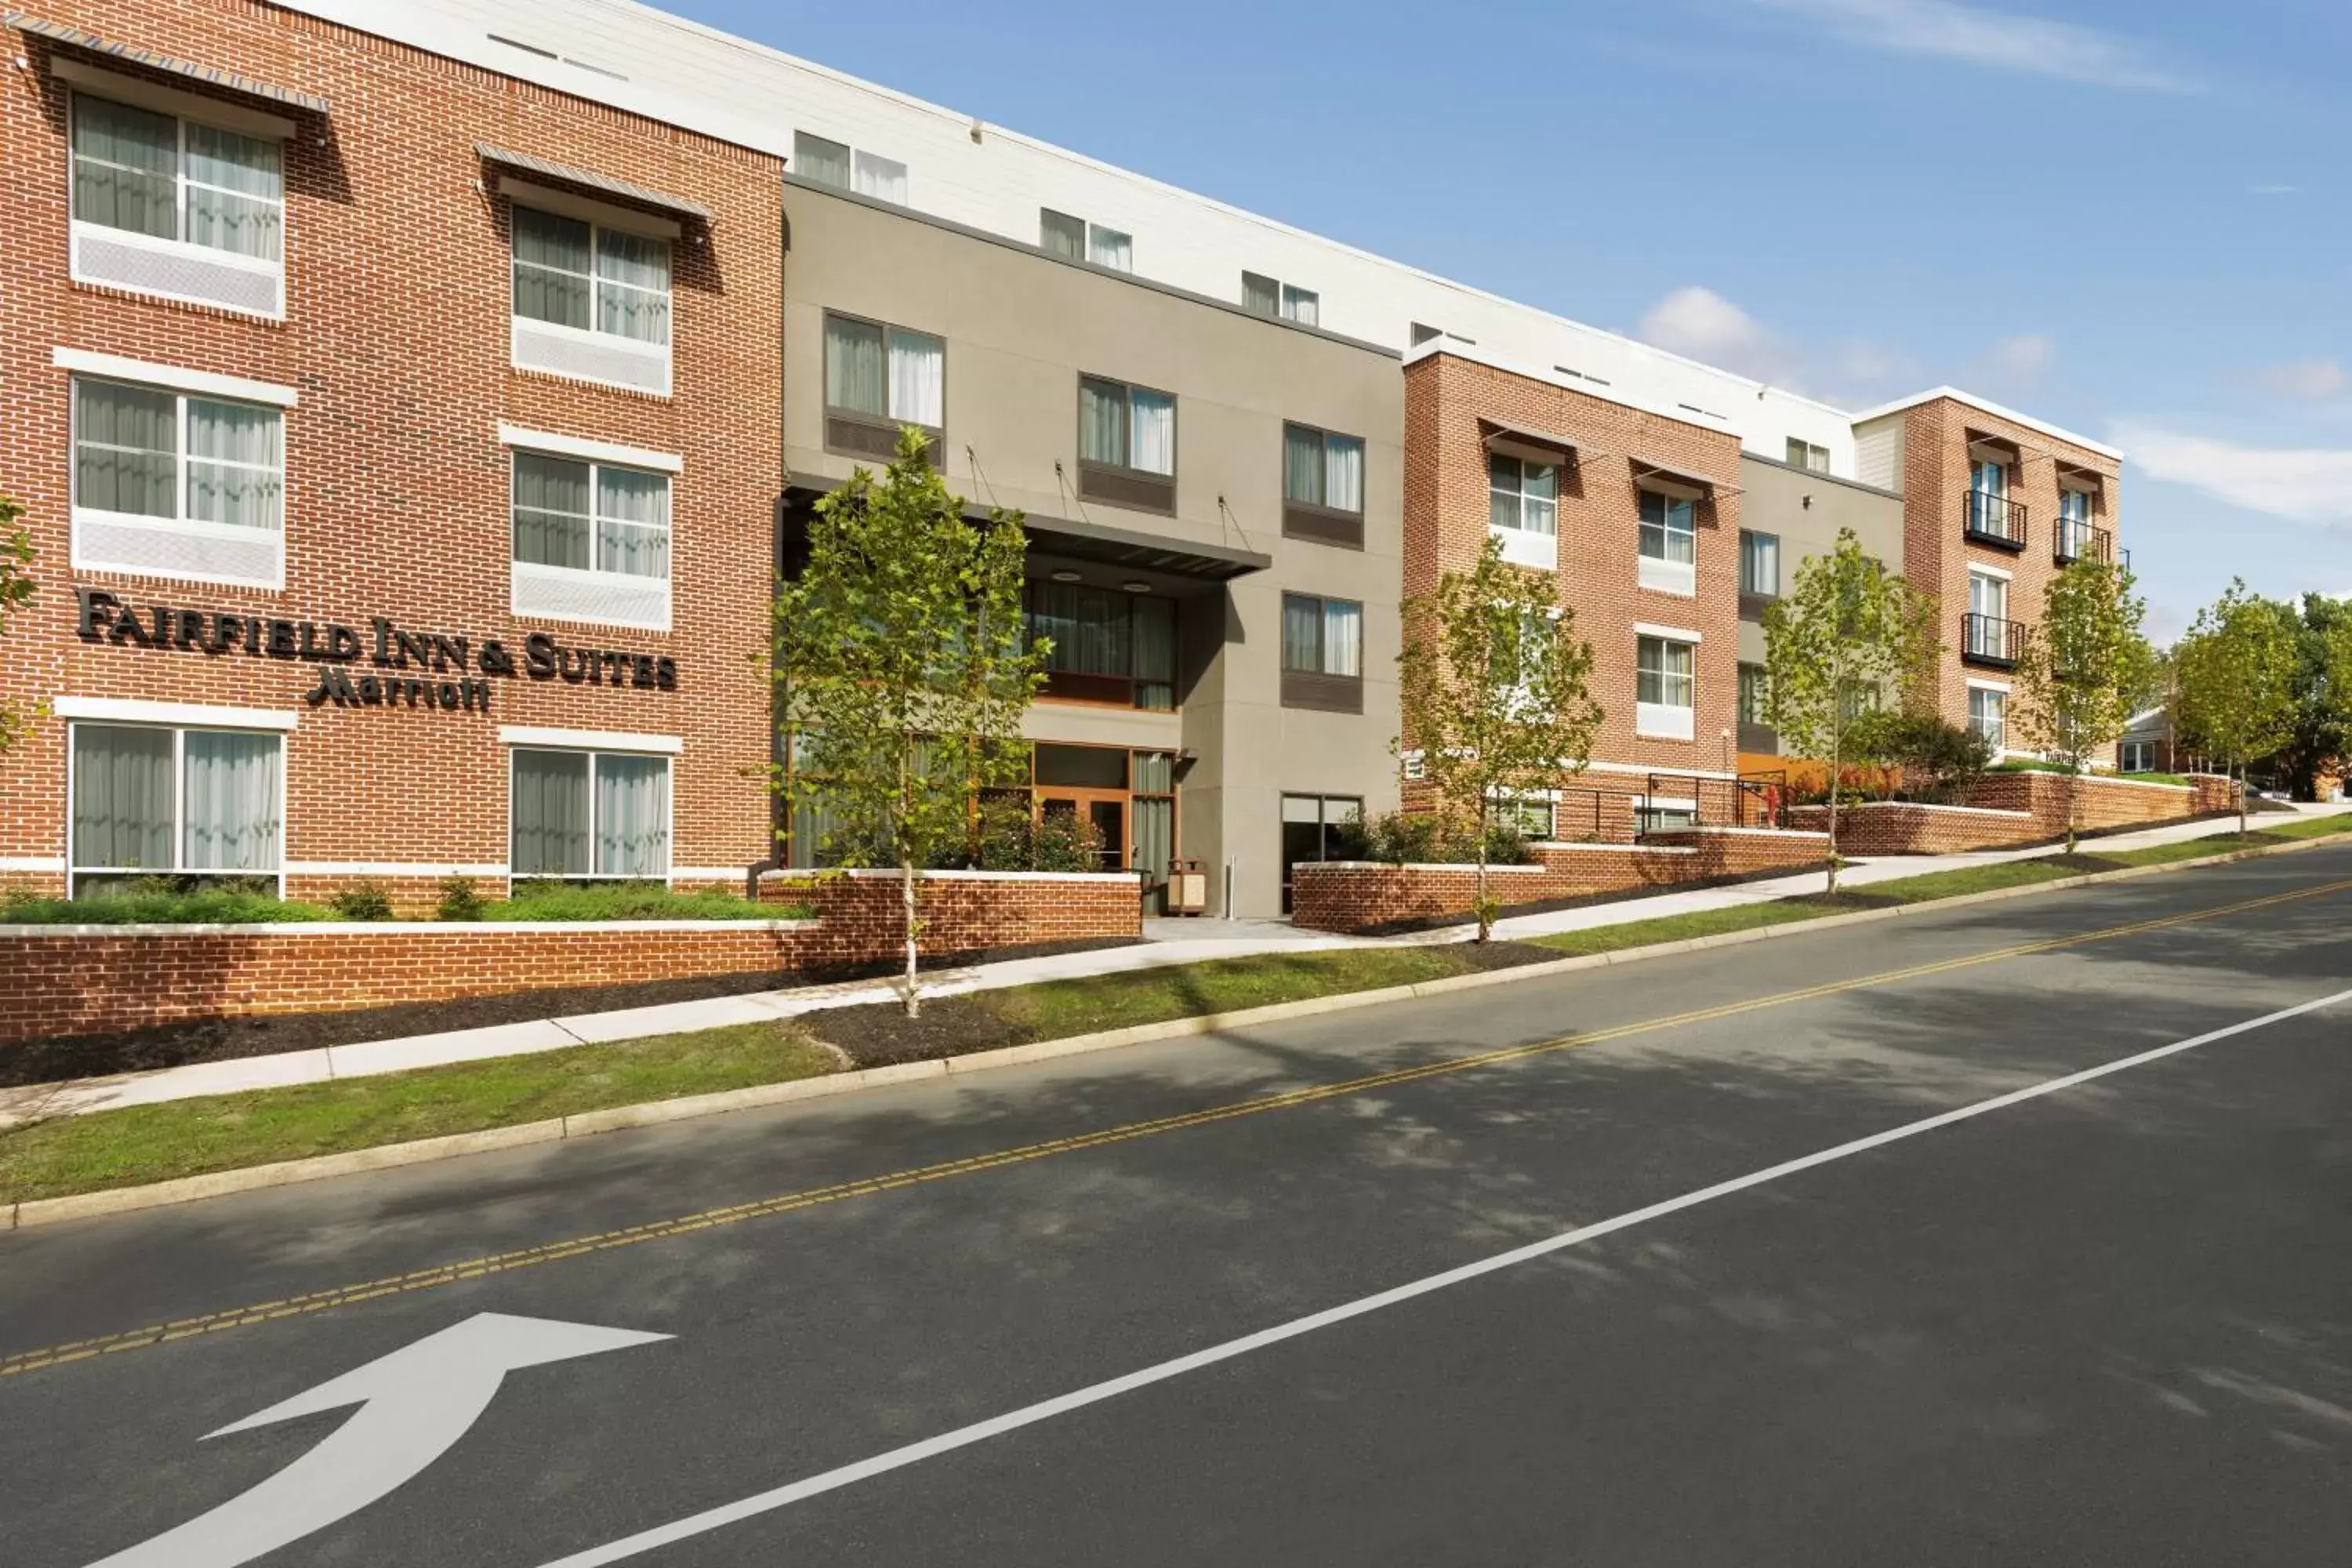 Property Building in Fairfield Inn & Suites by Marriott Charlottesville Downtown/University Area